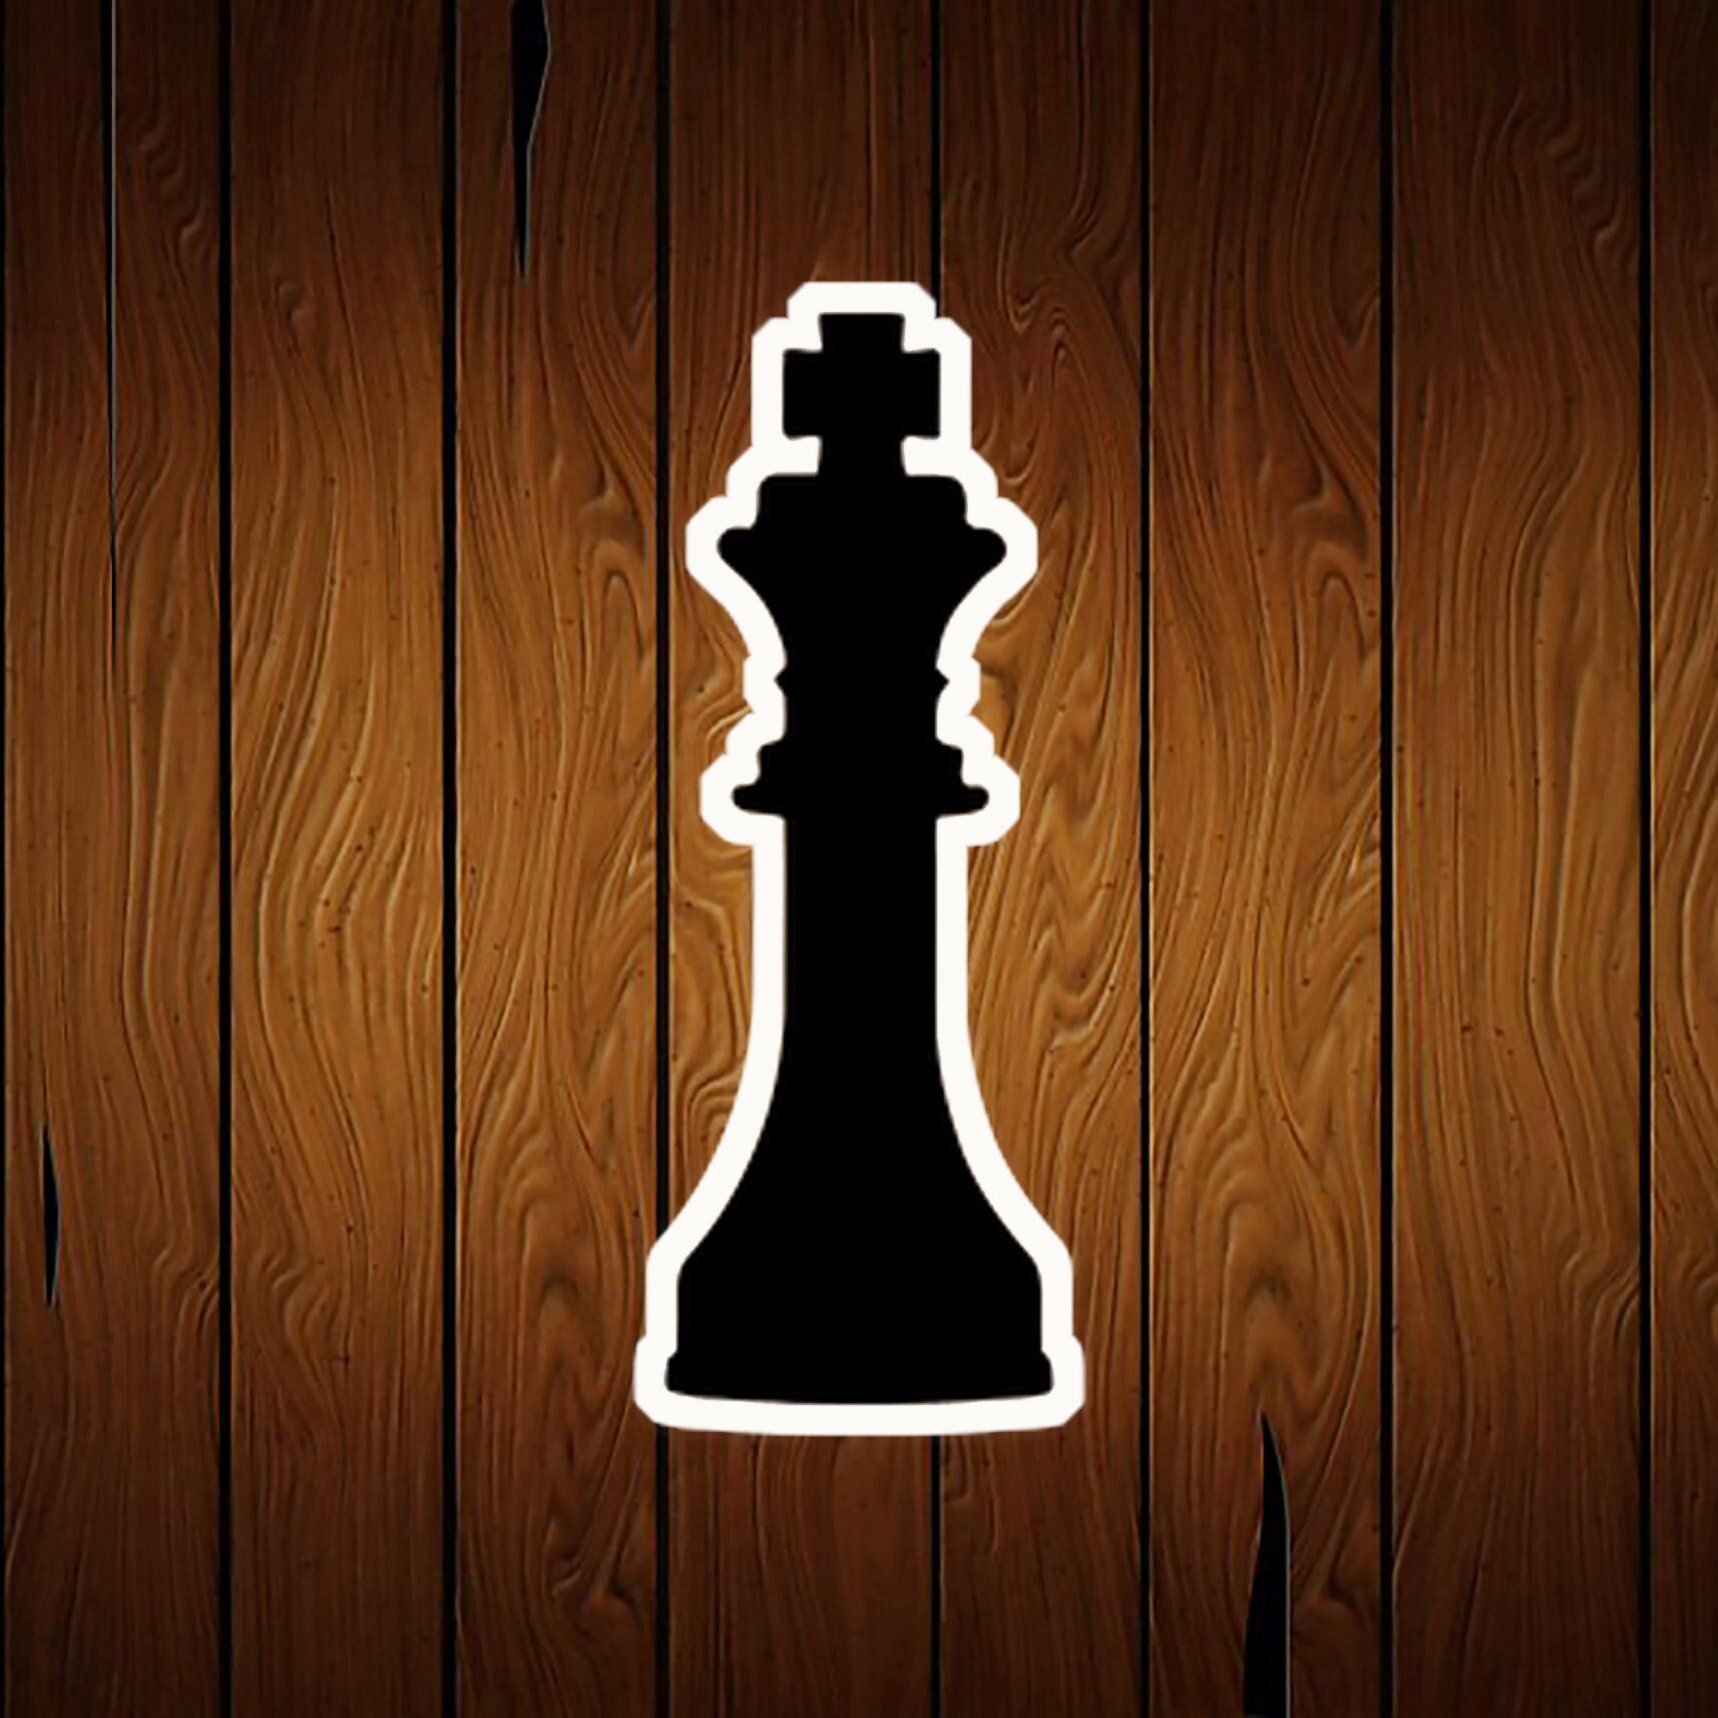 Chess ribbon ideal for gamers, party decor, party favors, gift